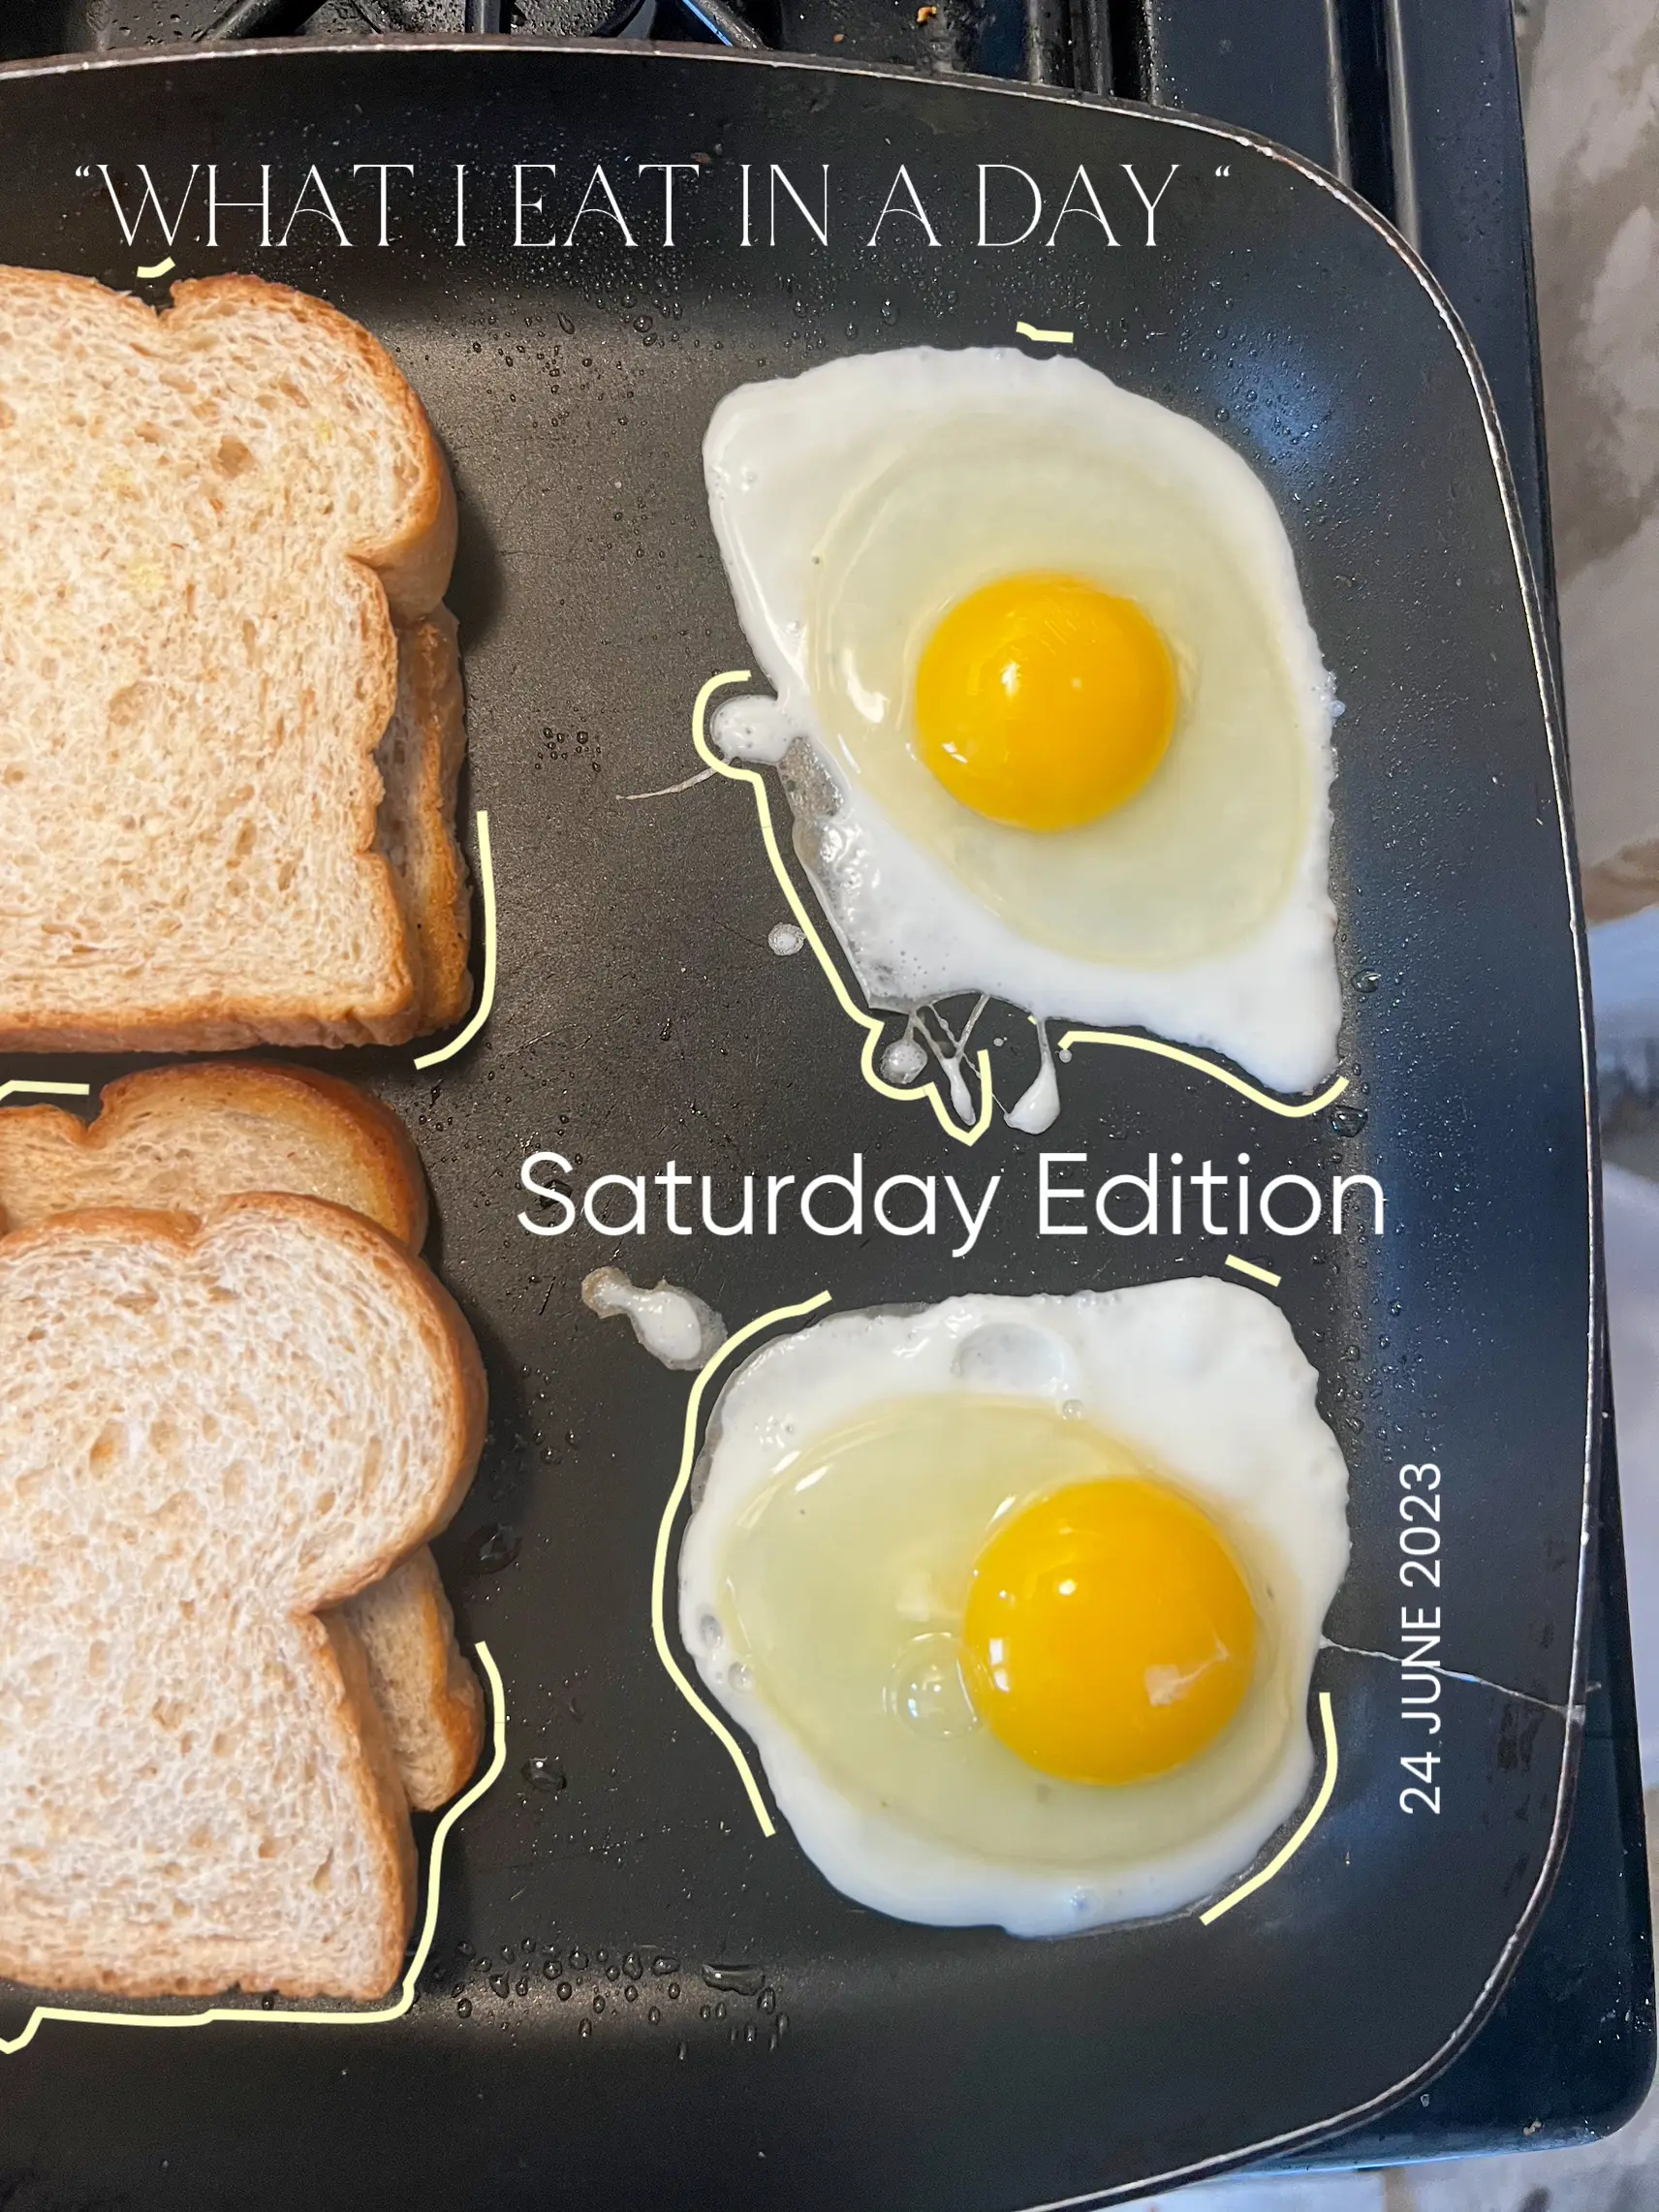 Cooking memes that can go with breakfast, lunch, and dinner